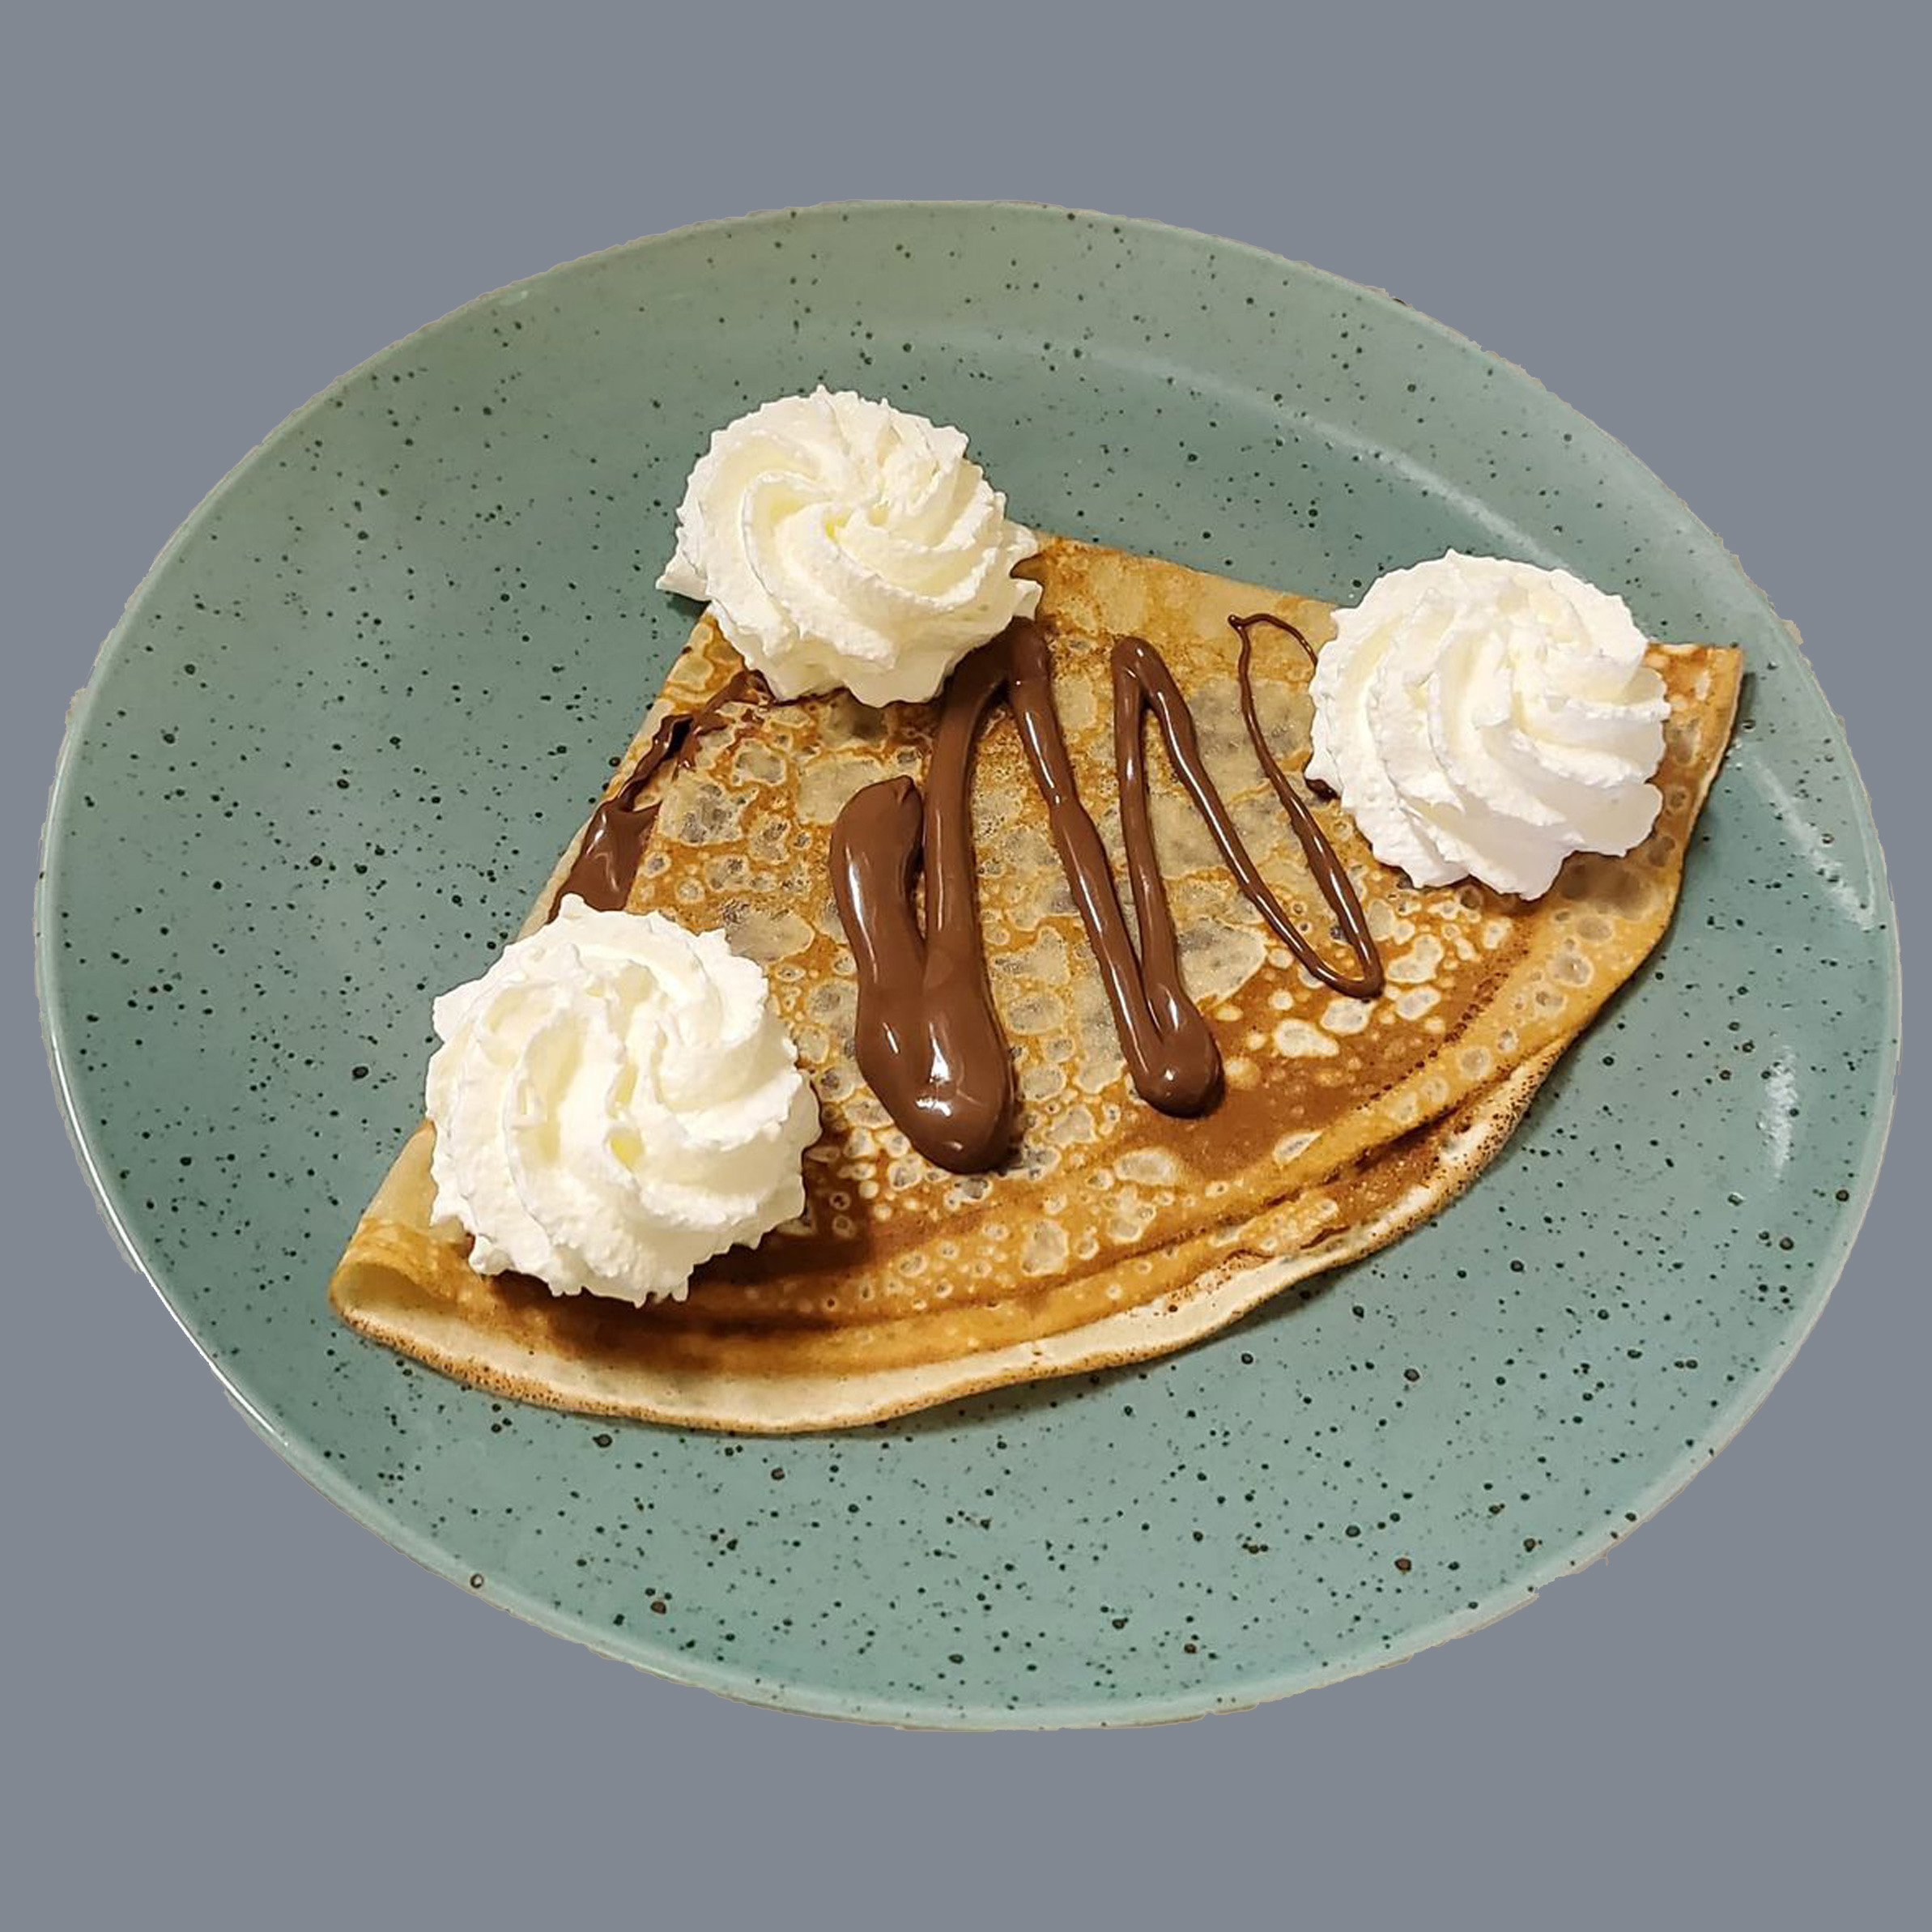 ¨Pancake with nutella and chantilly